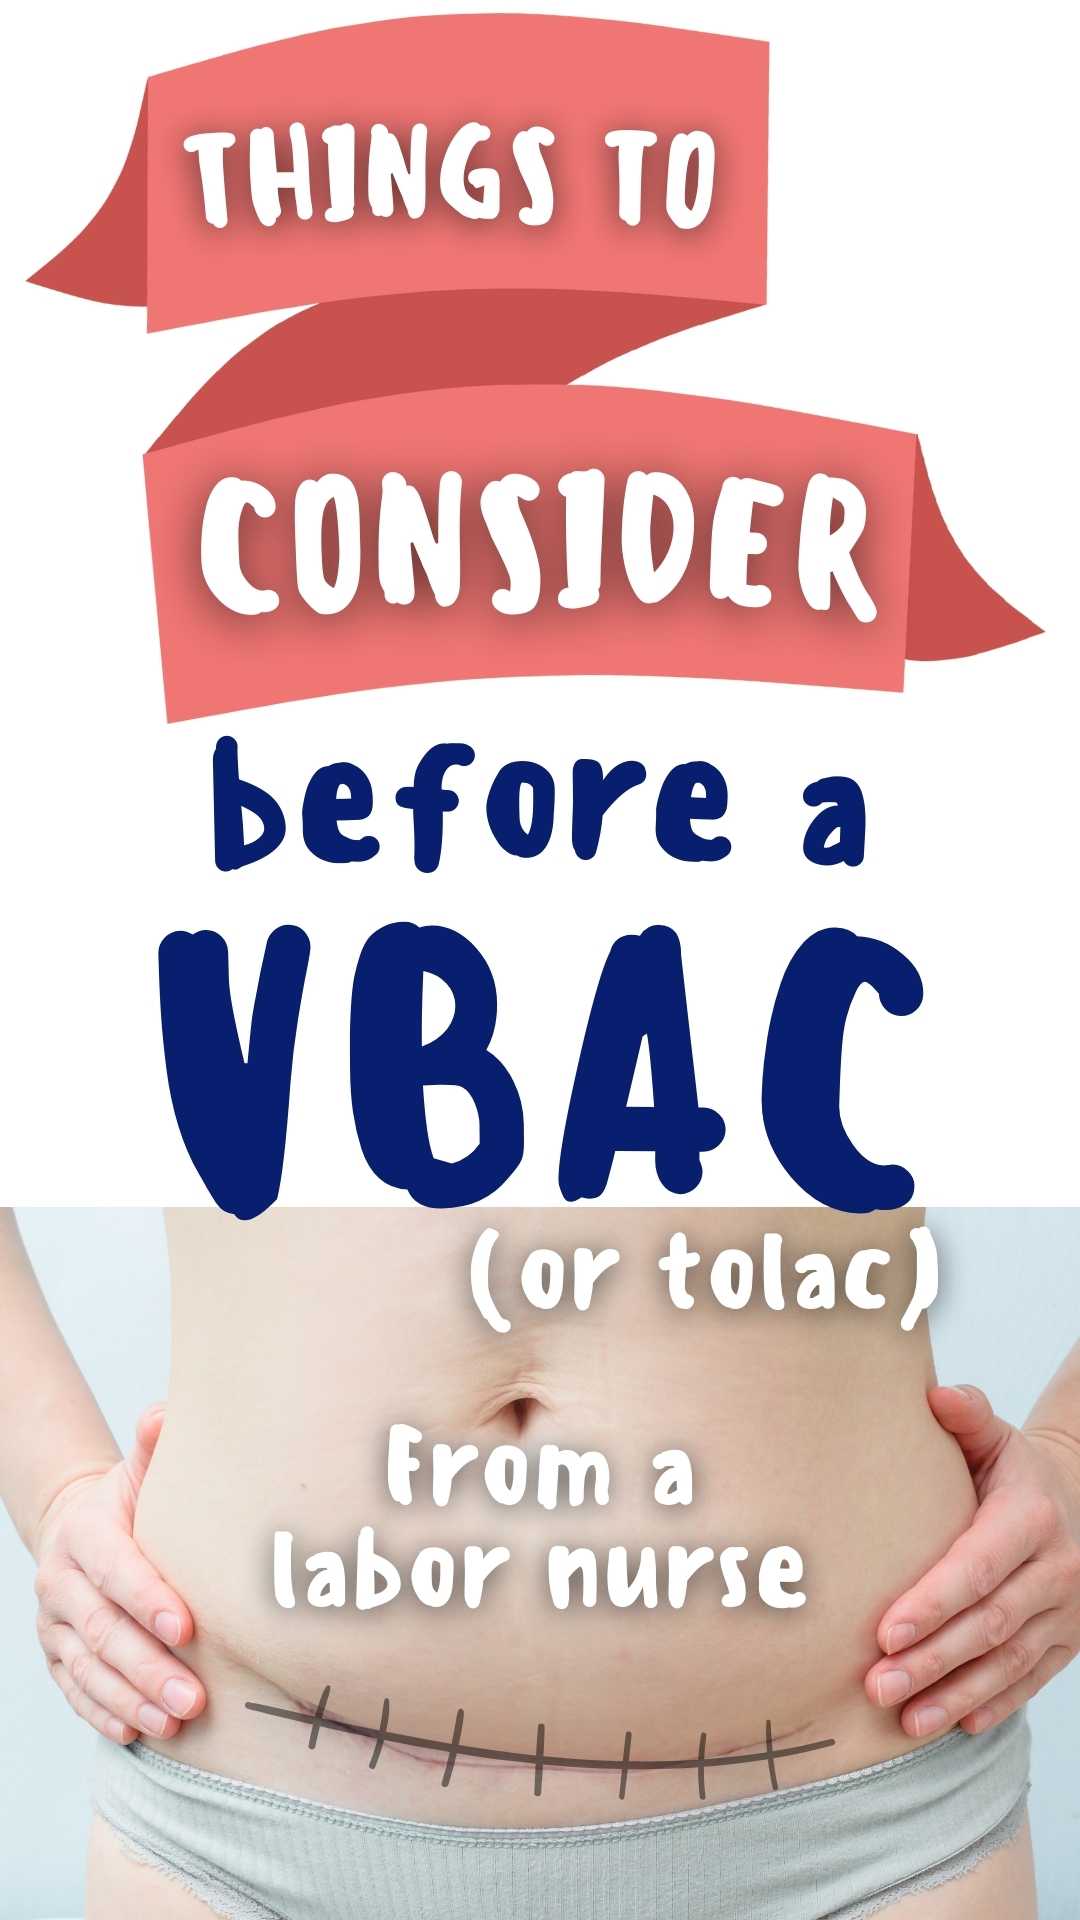 woman with a VBAC scar / things to consider before a VBAC(or tolac) from a labor nurse.